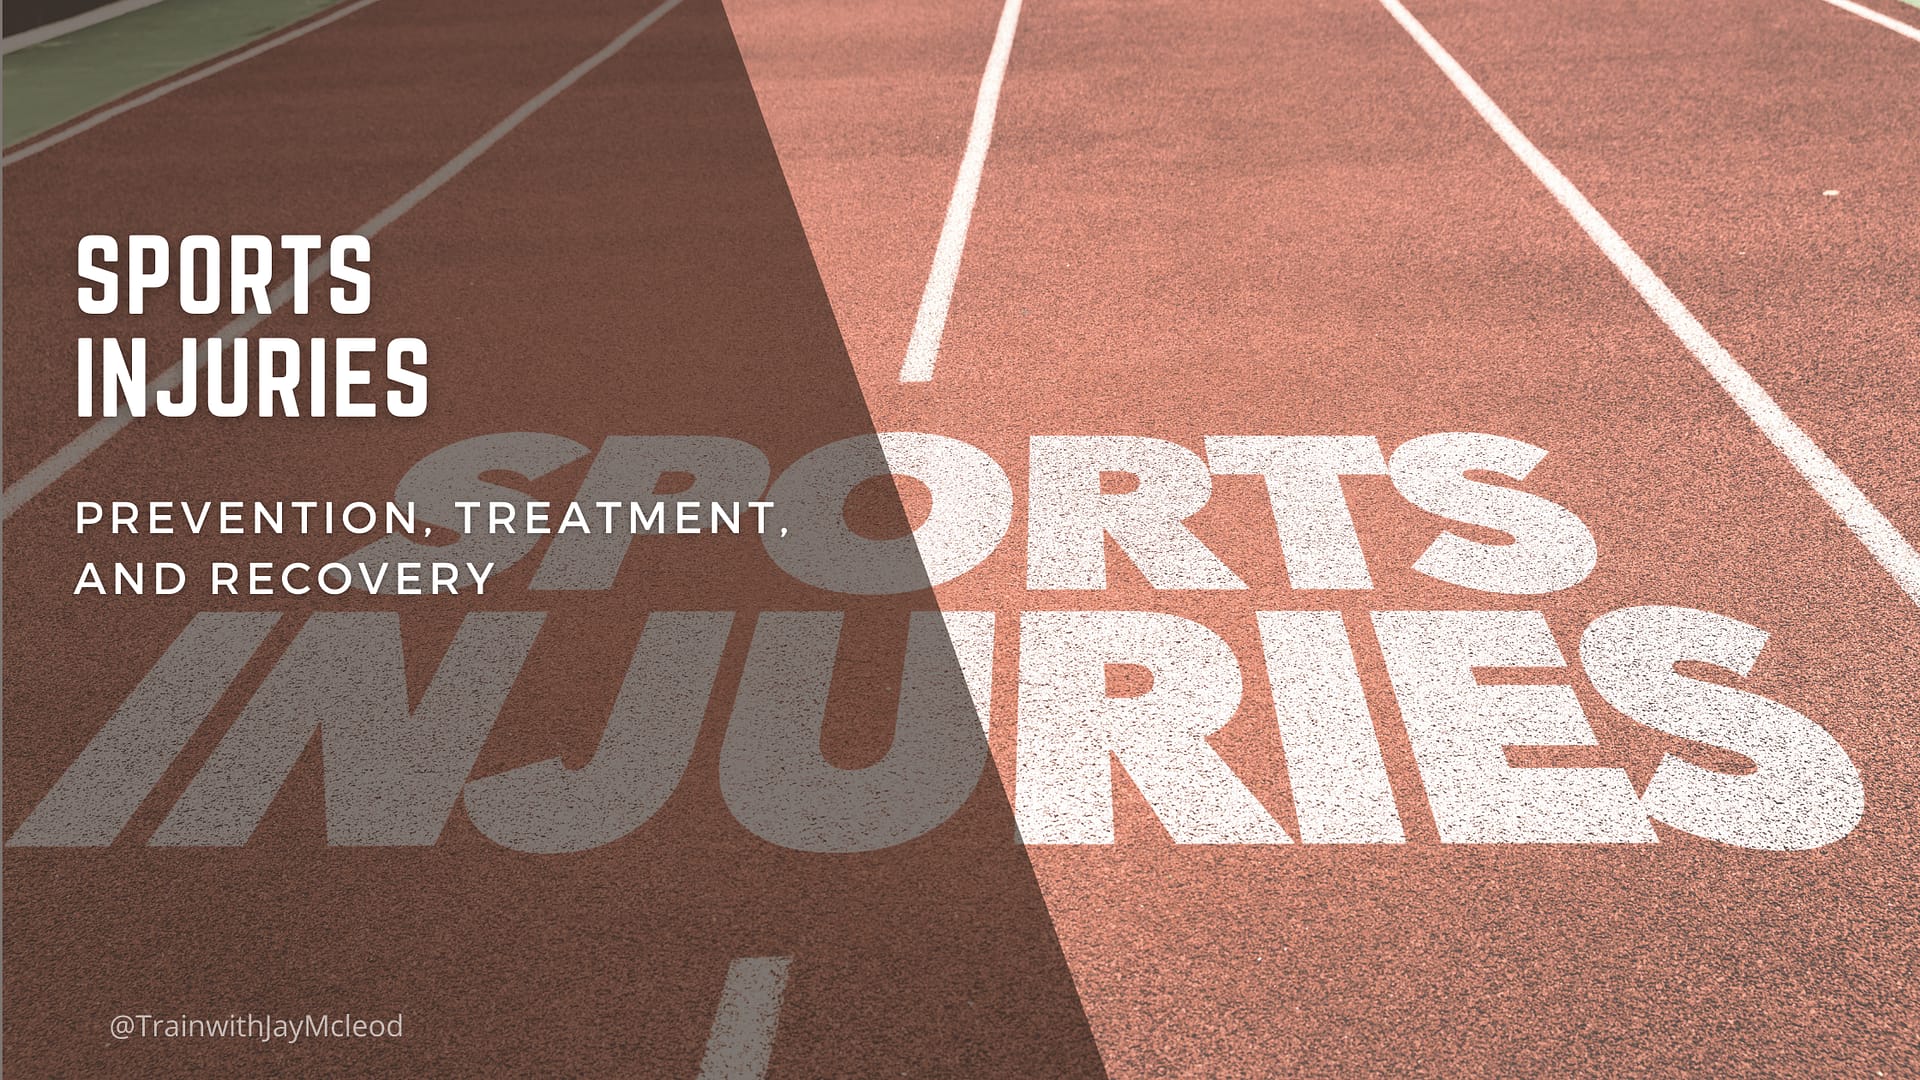 Sports Injuries Prevention | Personal Training in Burbank CA